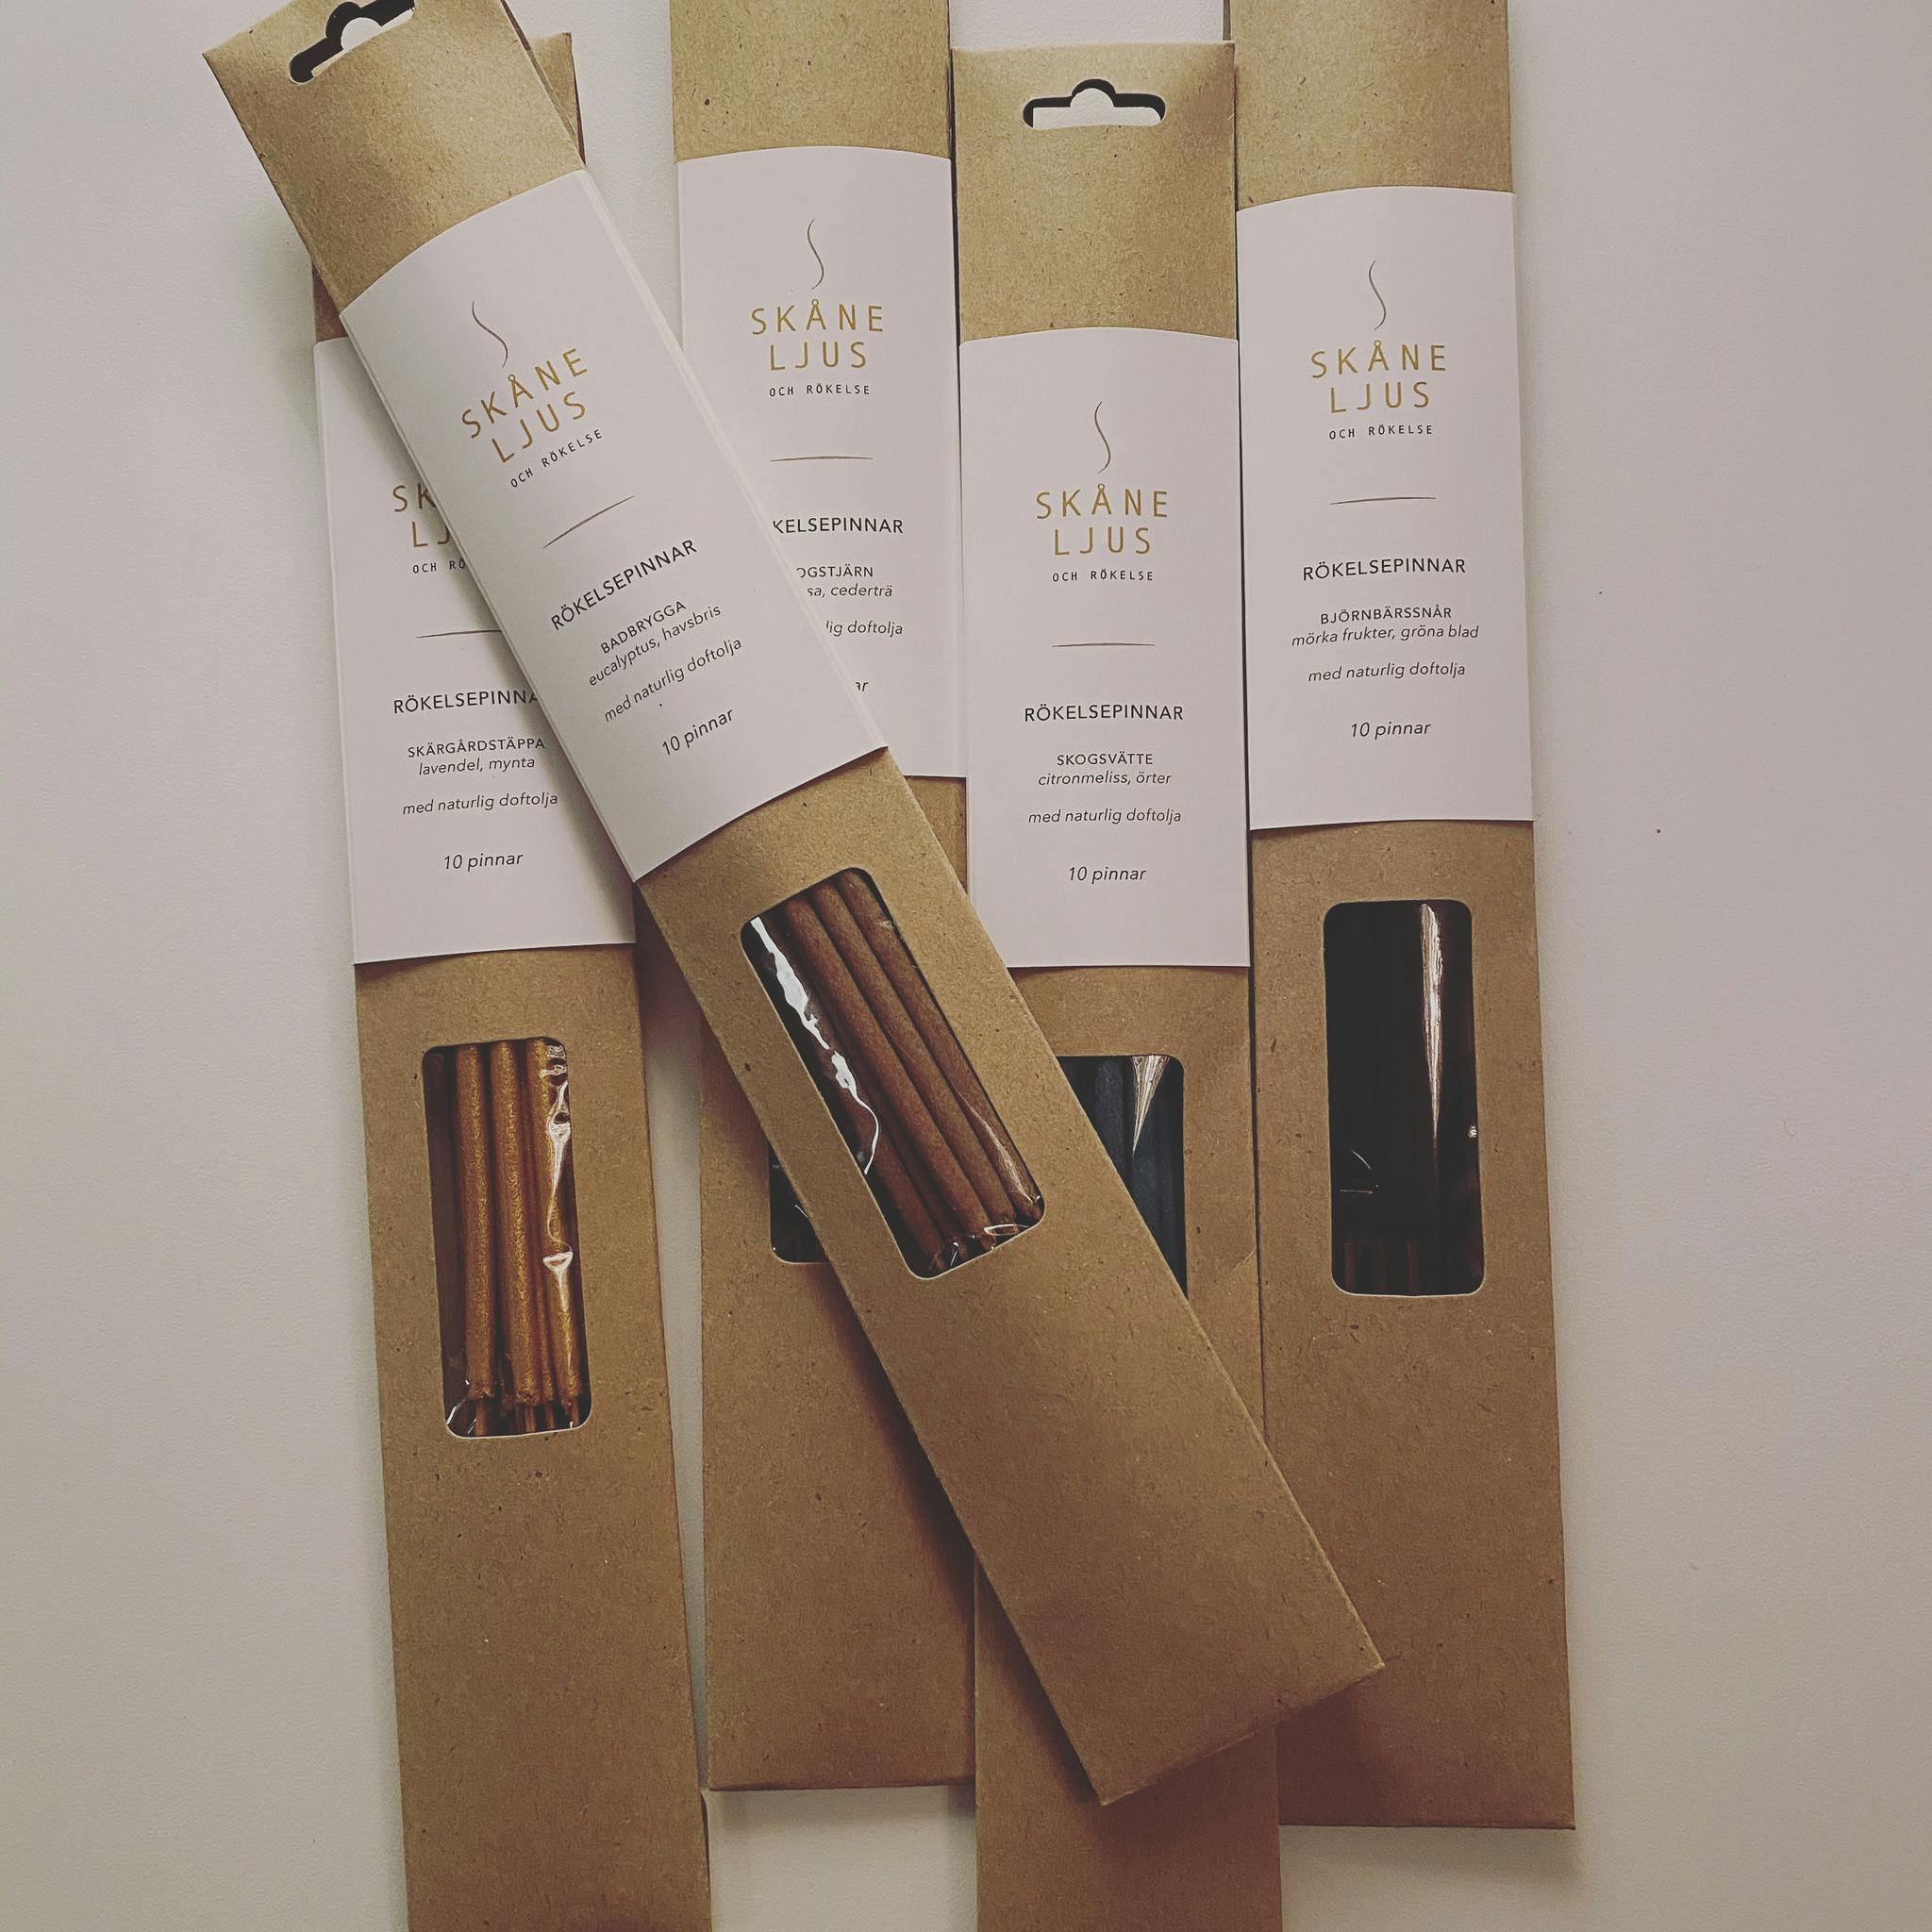 100% natural incense sticks, hand dipped in essential oils. natural colour in packs of 10.